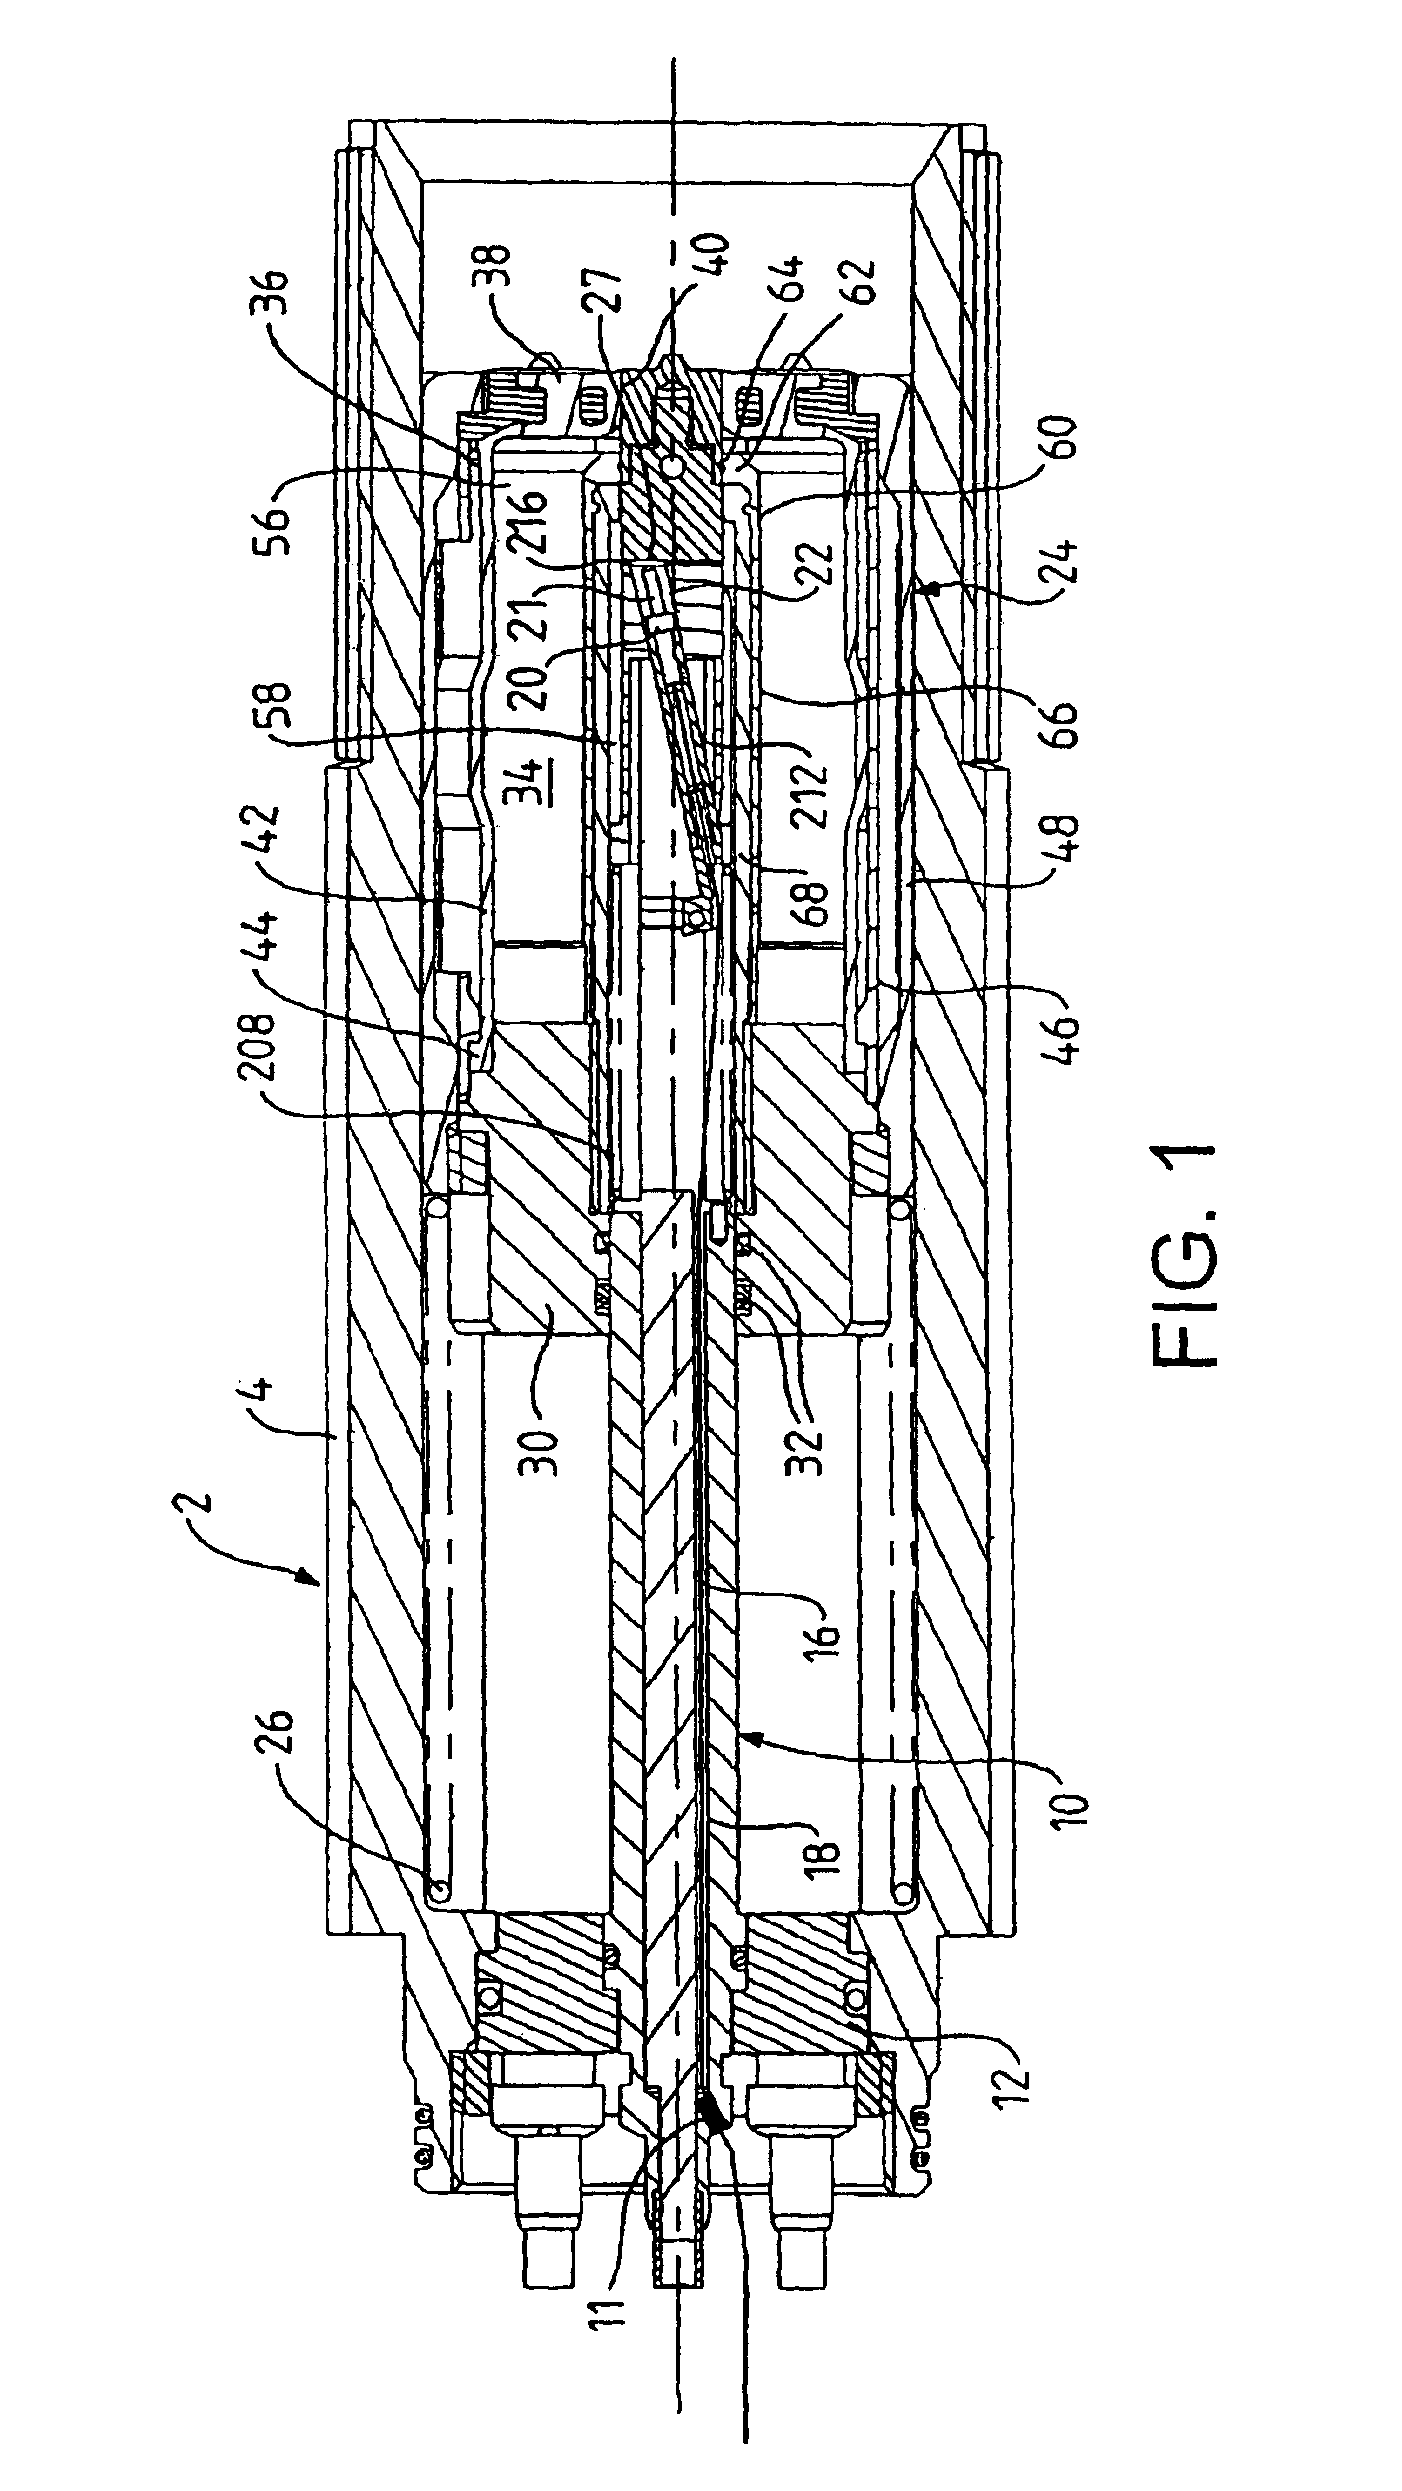 Connector for making an optical connection underwater